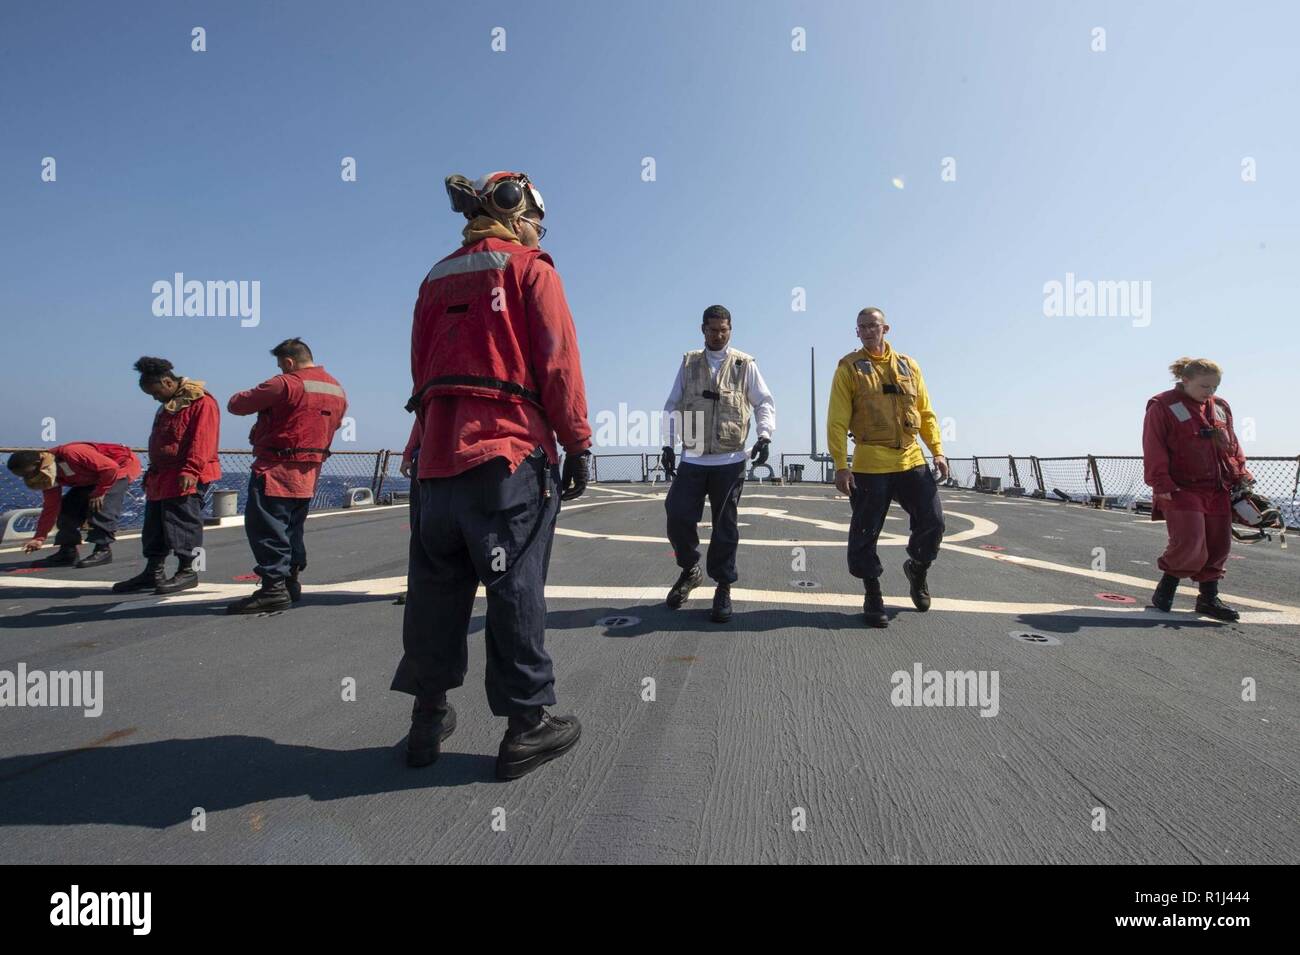 MEDITERRANEAN SEA (Sept. 26, 2018) Sailors look for foreign object debris on the flight deck before the start of flight operations aboard the Arleigh Burke-class guided-missile destroyer USS Arleigh Burke (DDG 51) in the Mediterranean Sea Sept. 26, 2018. Arleigh Burke, homeported at Naval Station Norfolk, is conducting naval operations in the U.S. 6th Fleet area of operations in support of U.S. national security interests in Europe and Africa. Stock Photo